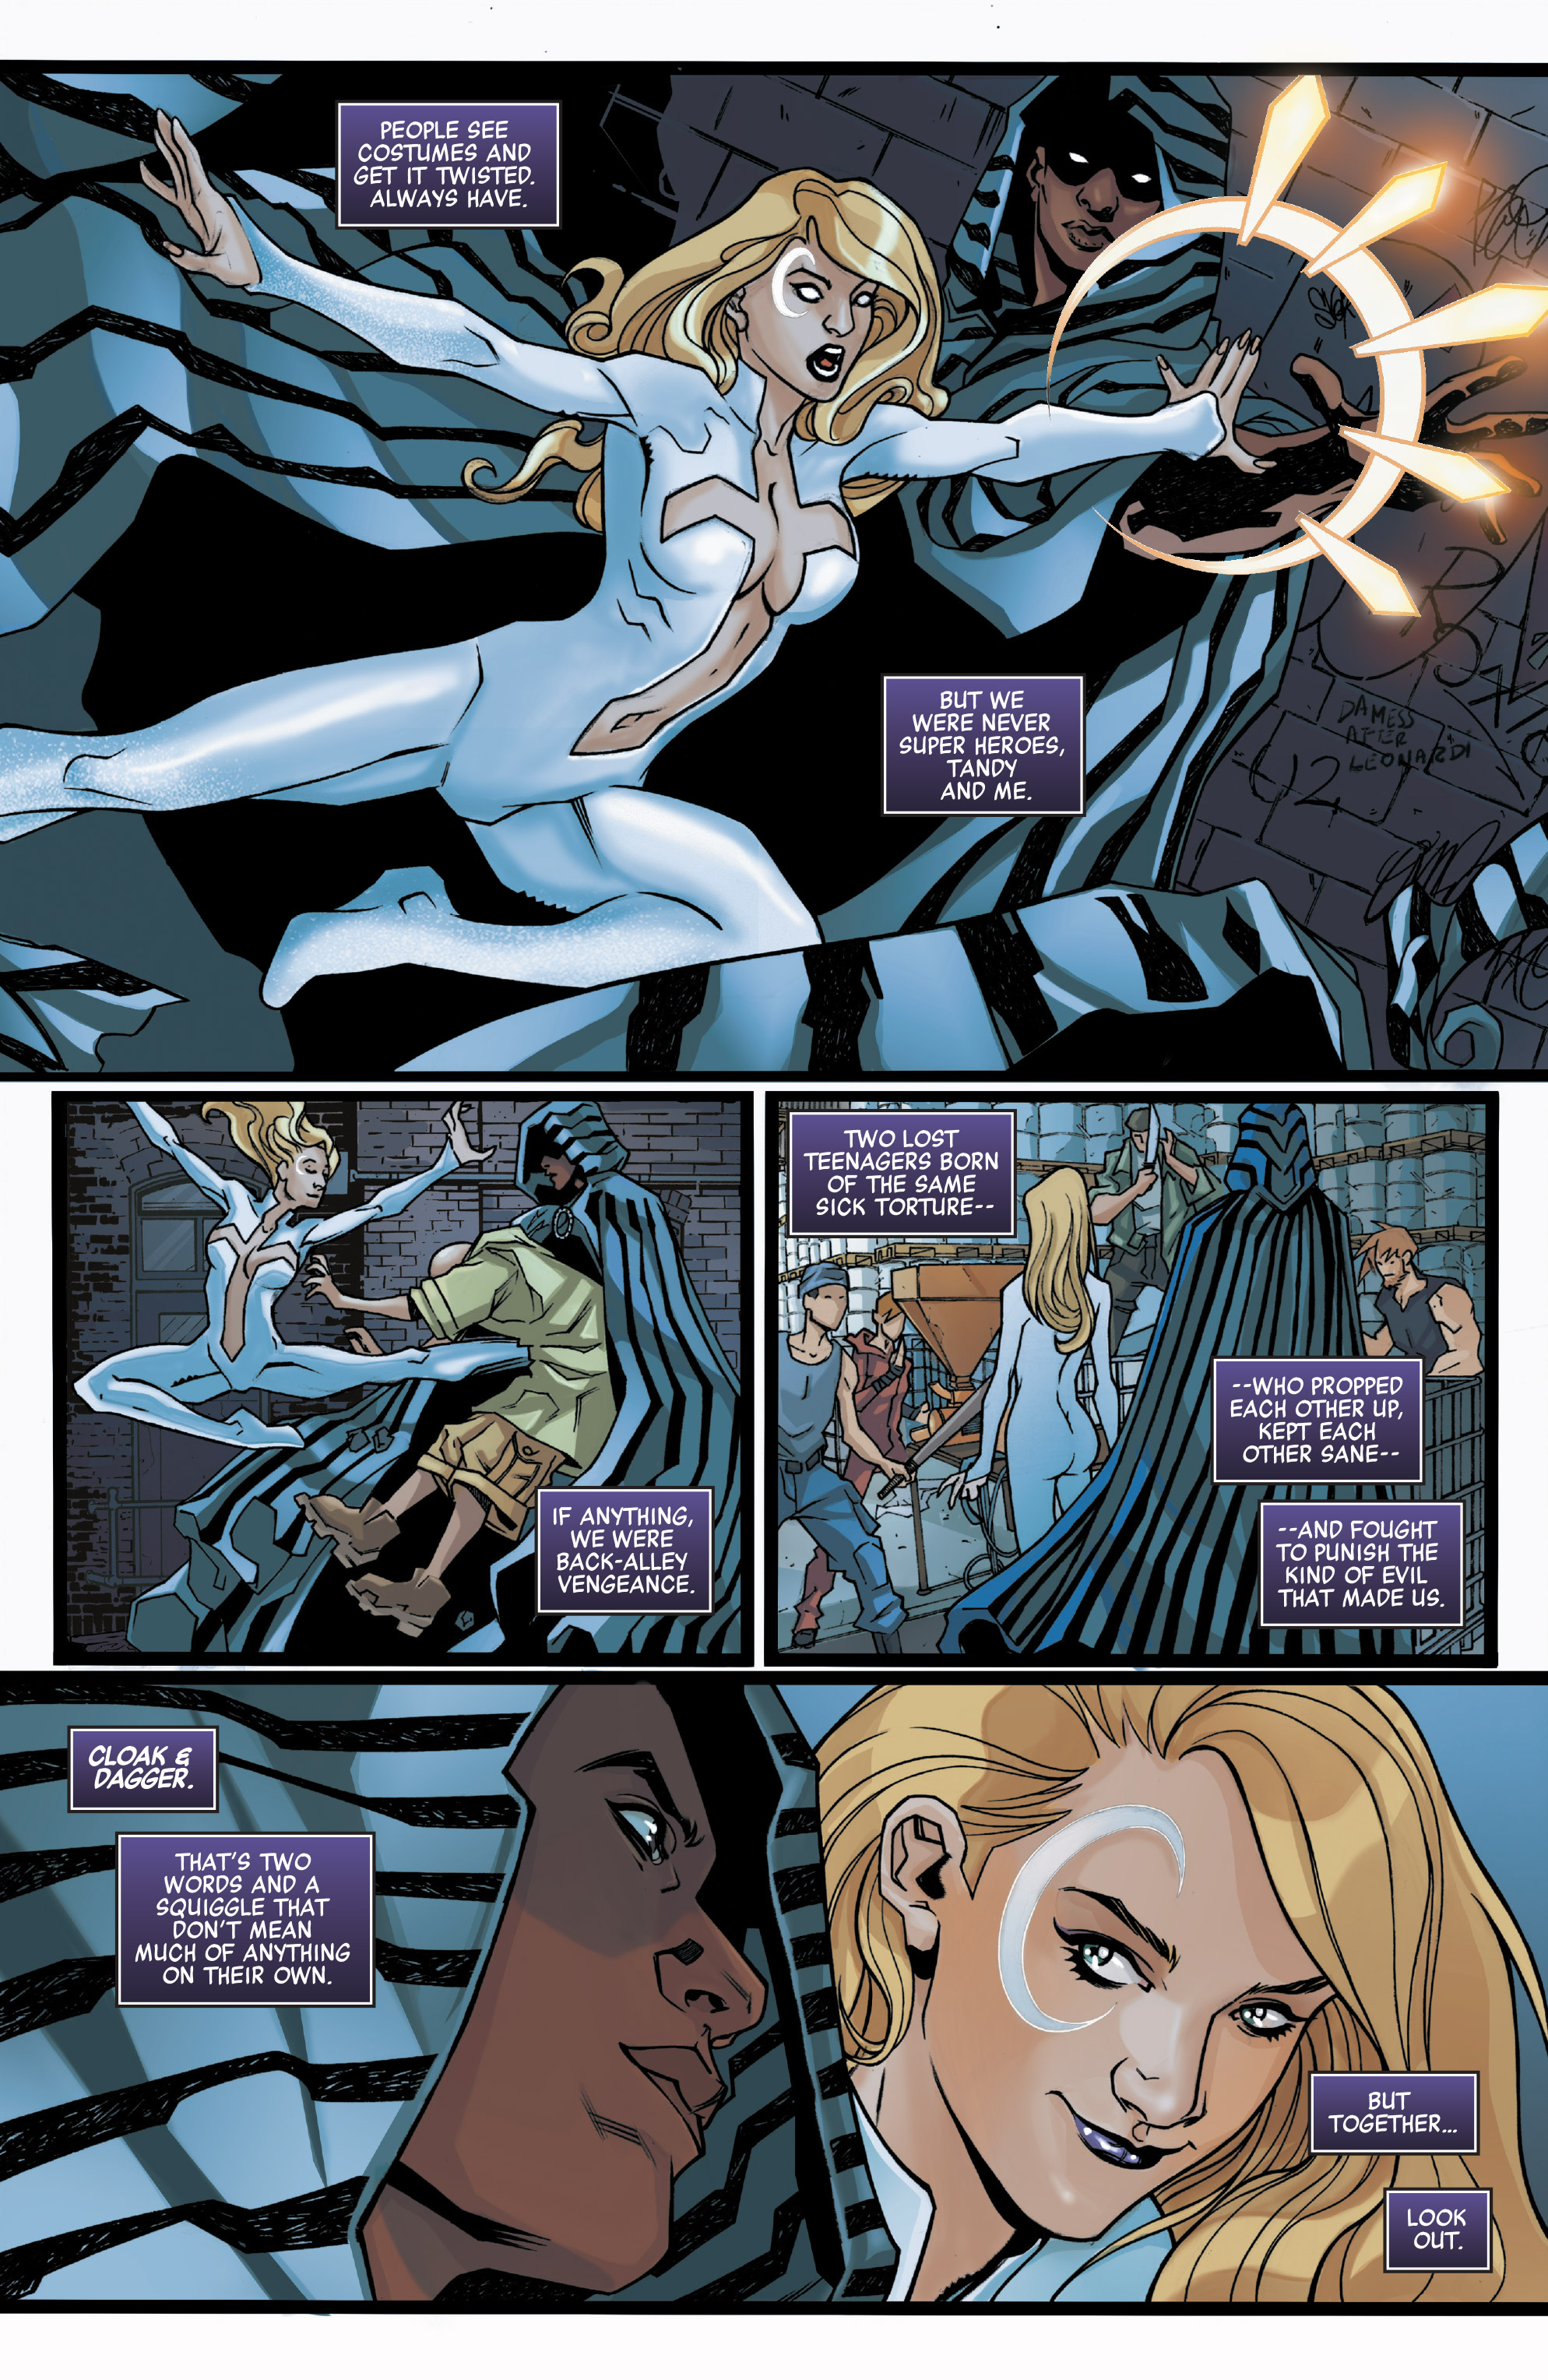 Cloak and Dagger (2018-): Chapter 1 - Page 4